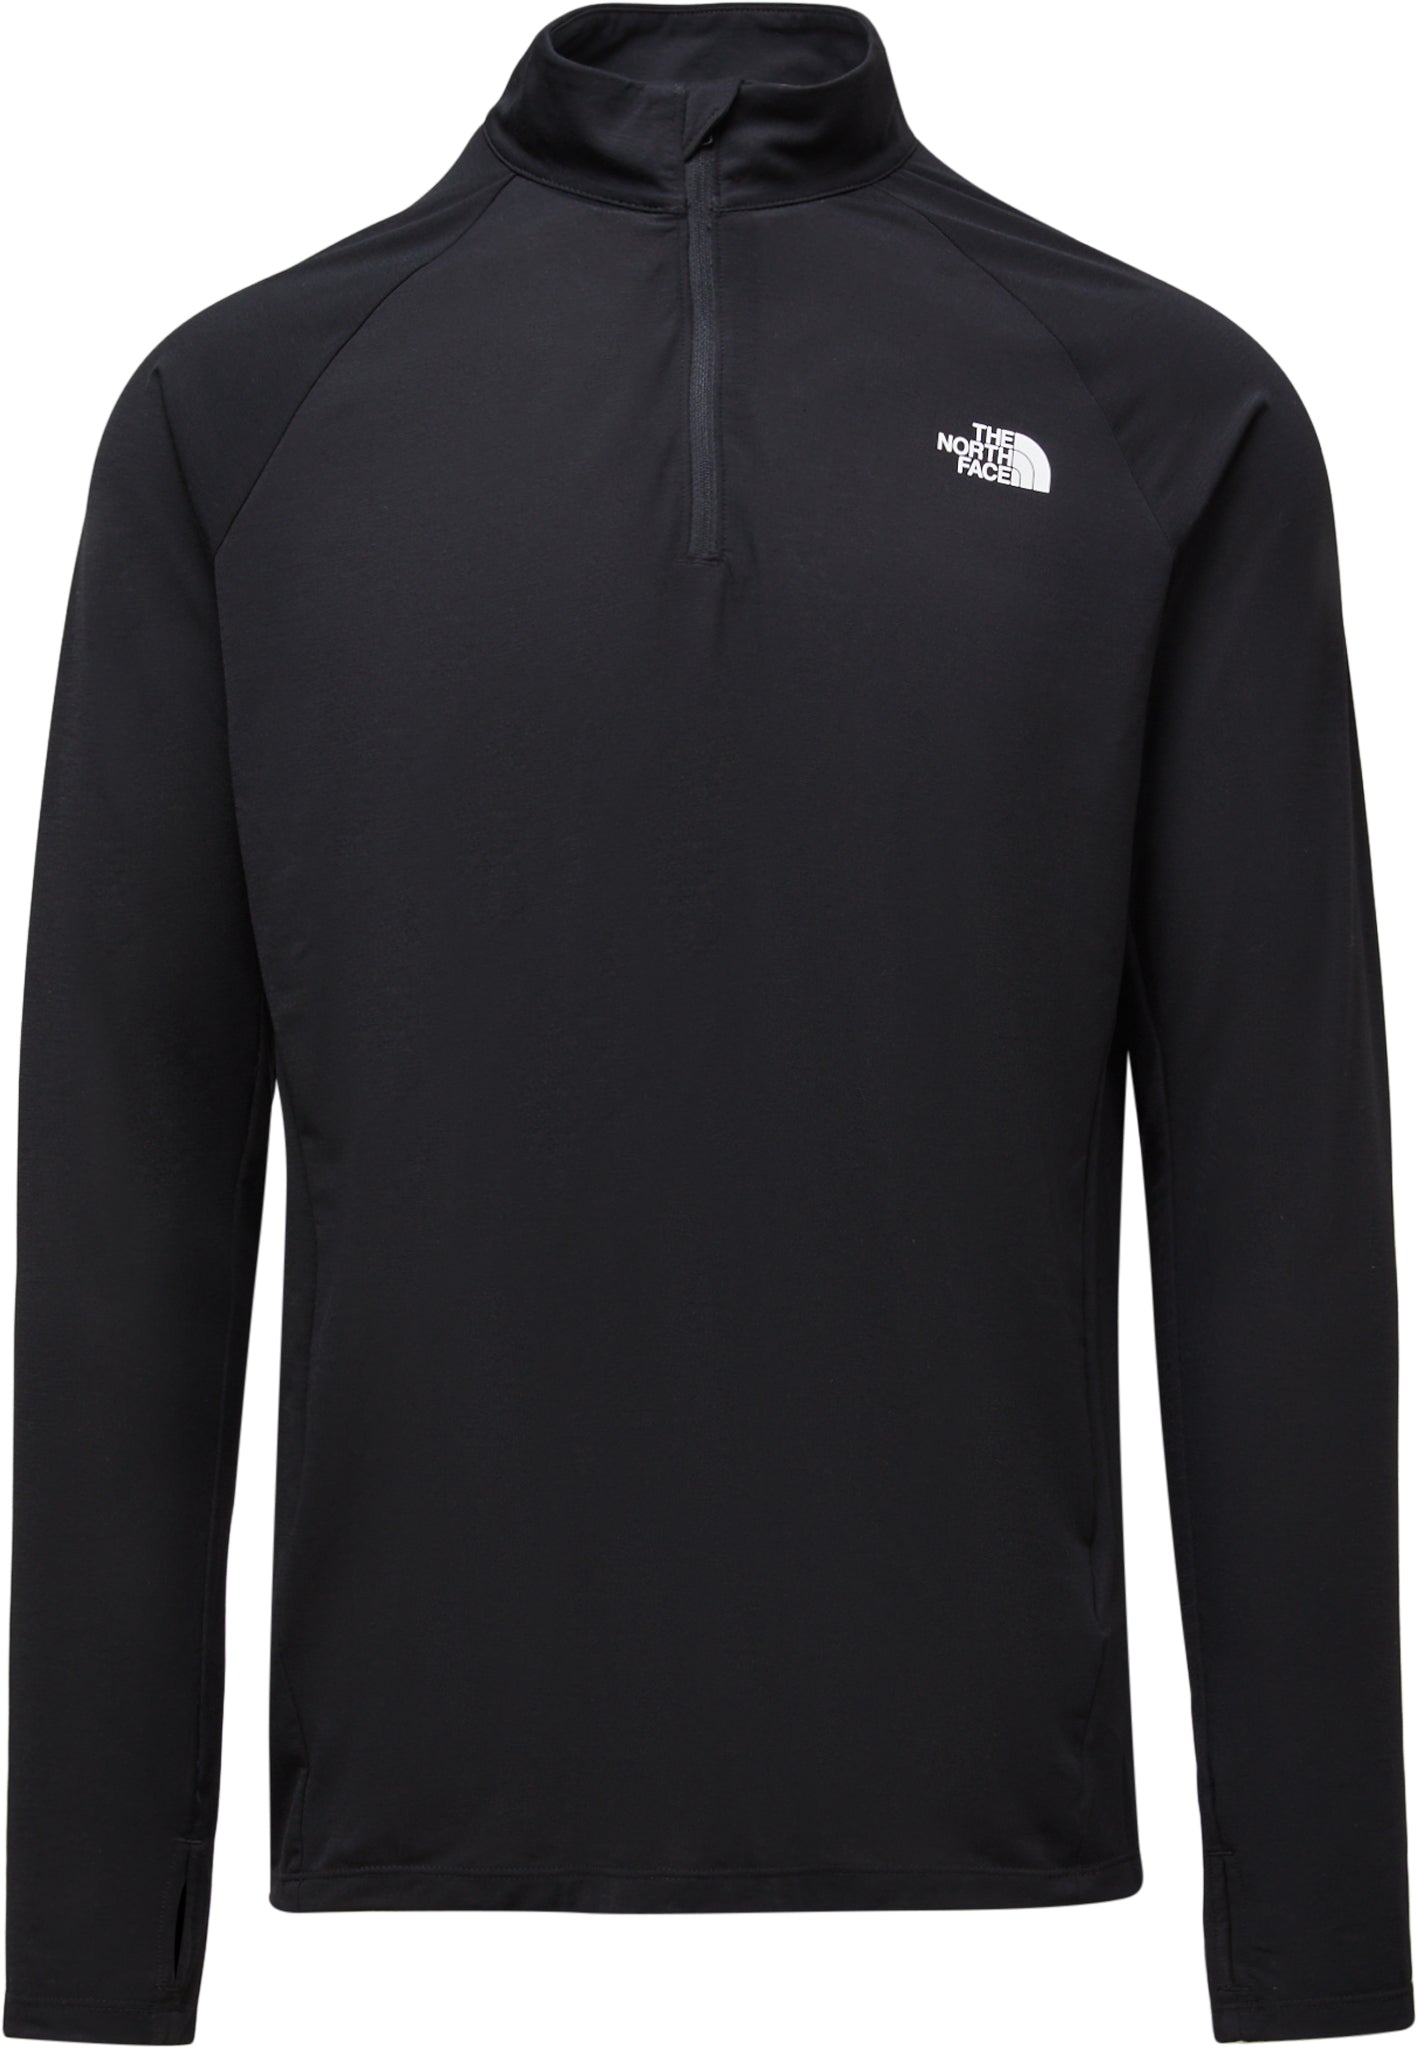 The North Face Wander ¼ Zip - Men’s | Altitude Sports